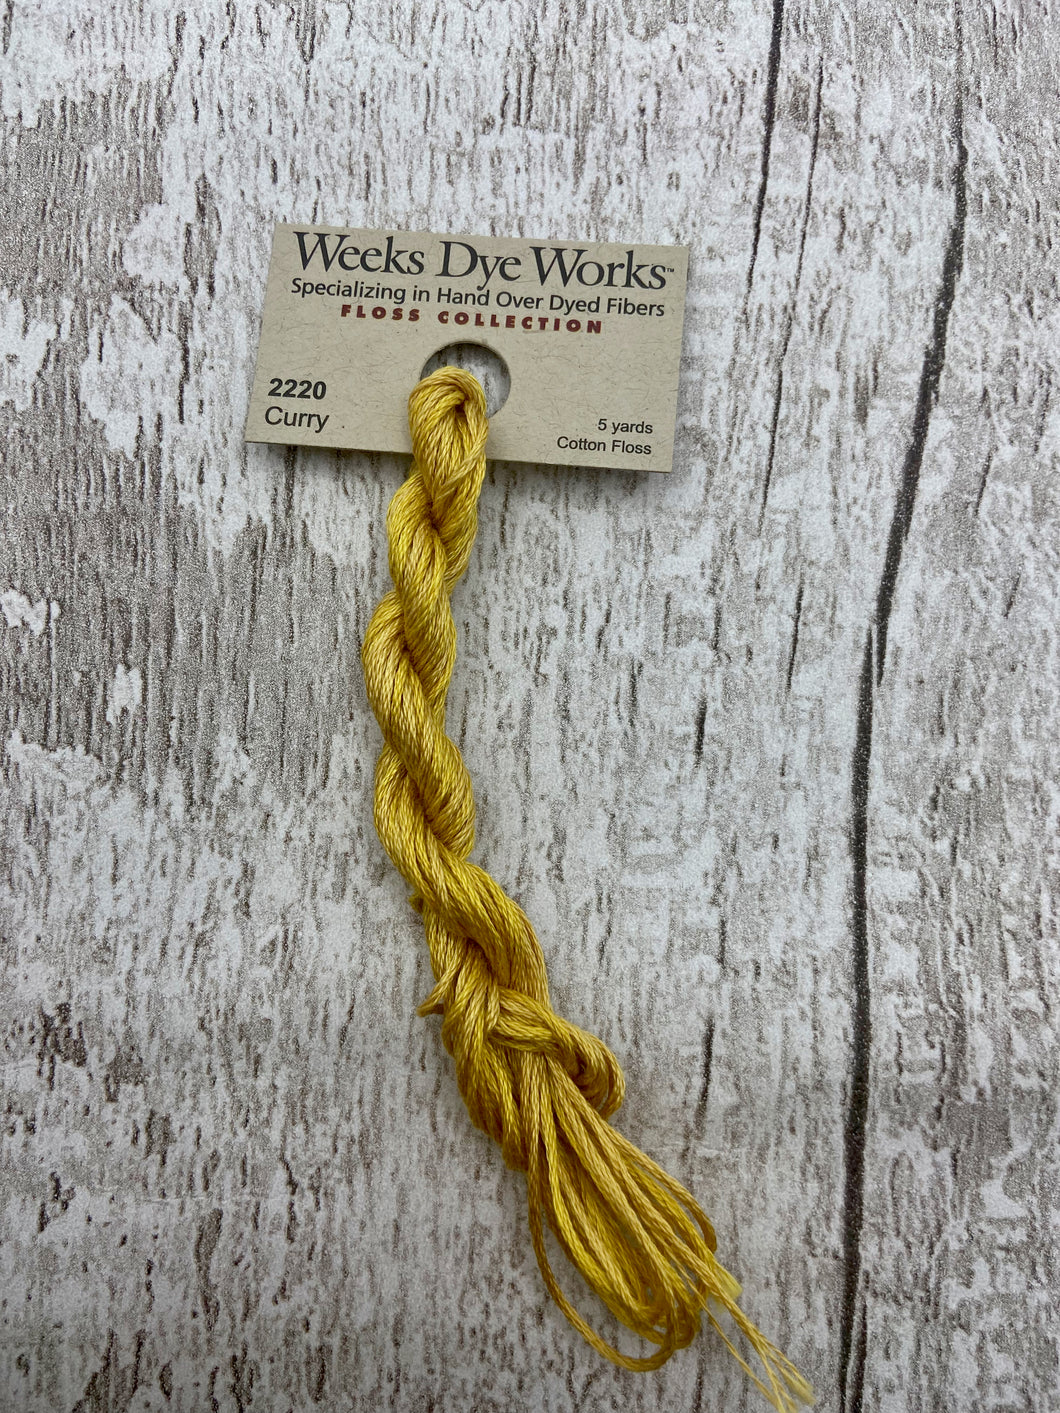 Curry (#2220) Weeks Dye Works, 6-strand cotton floss